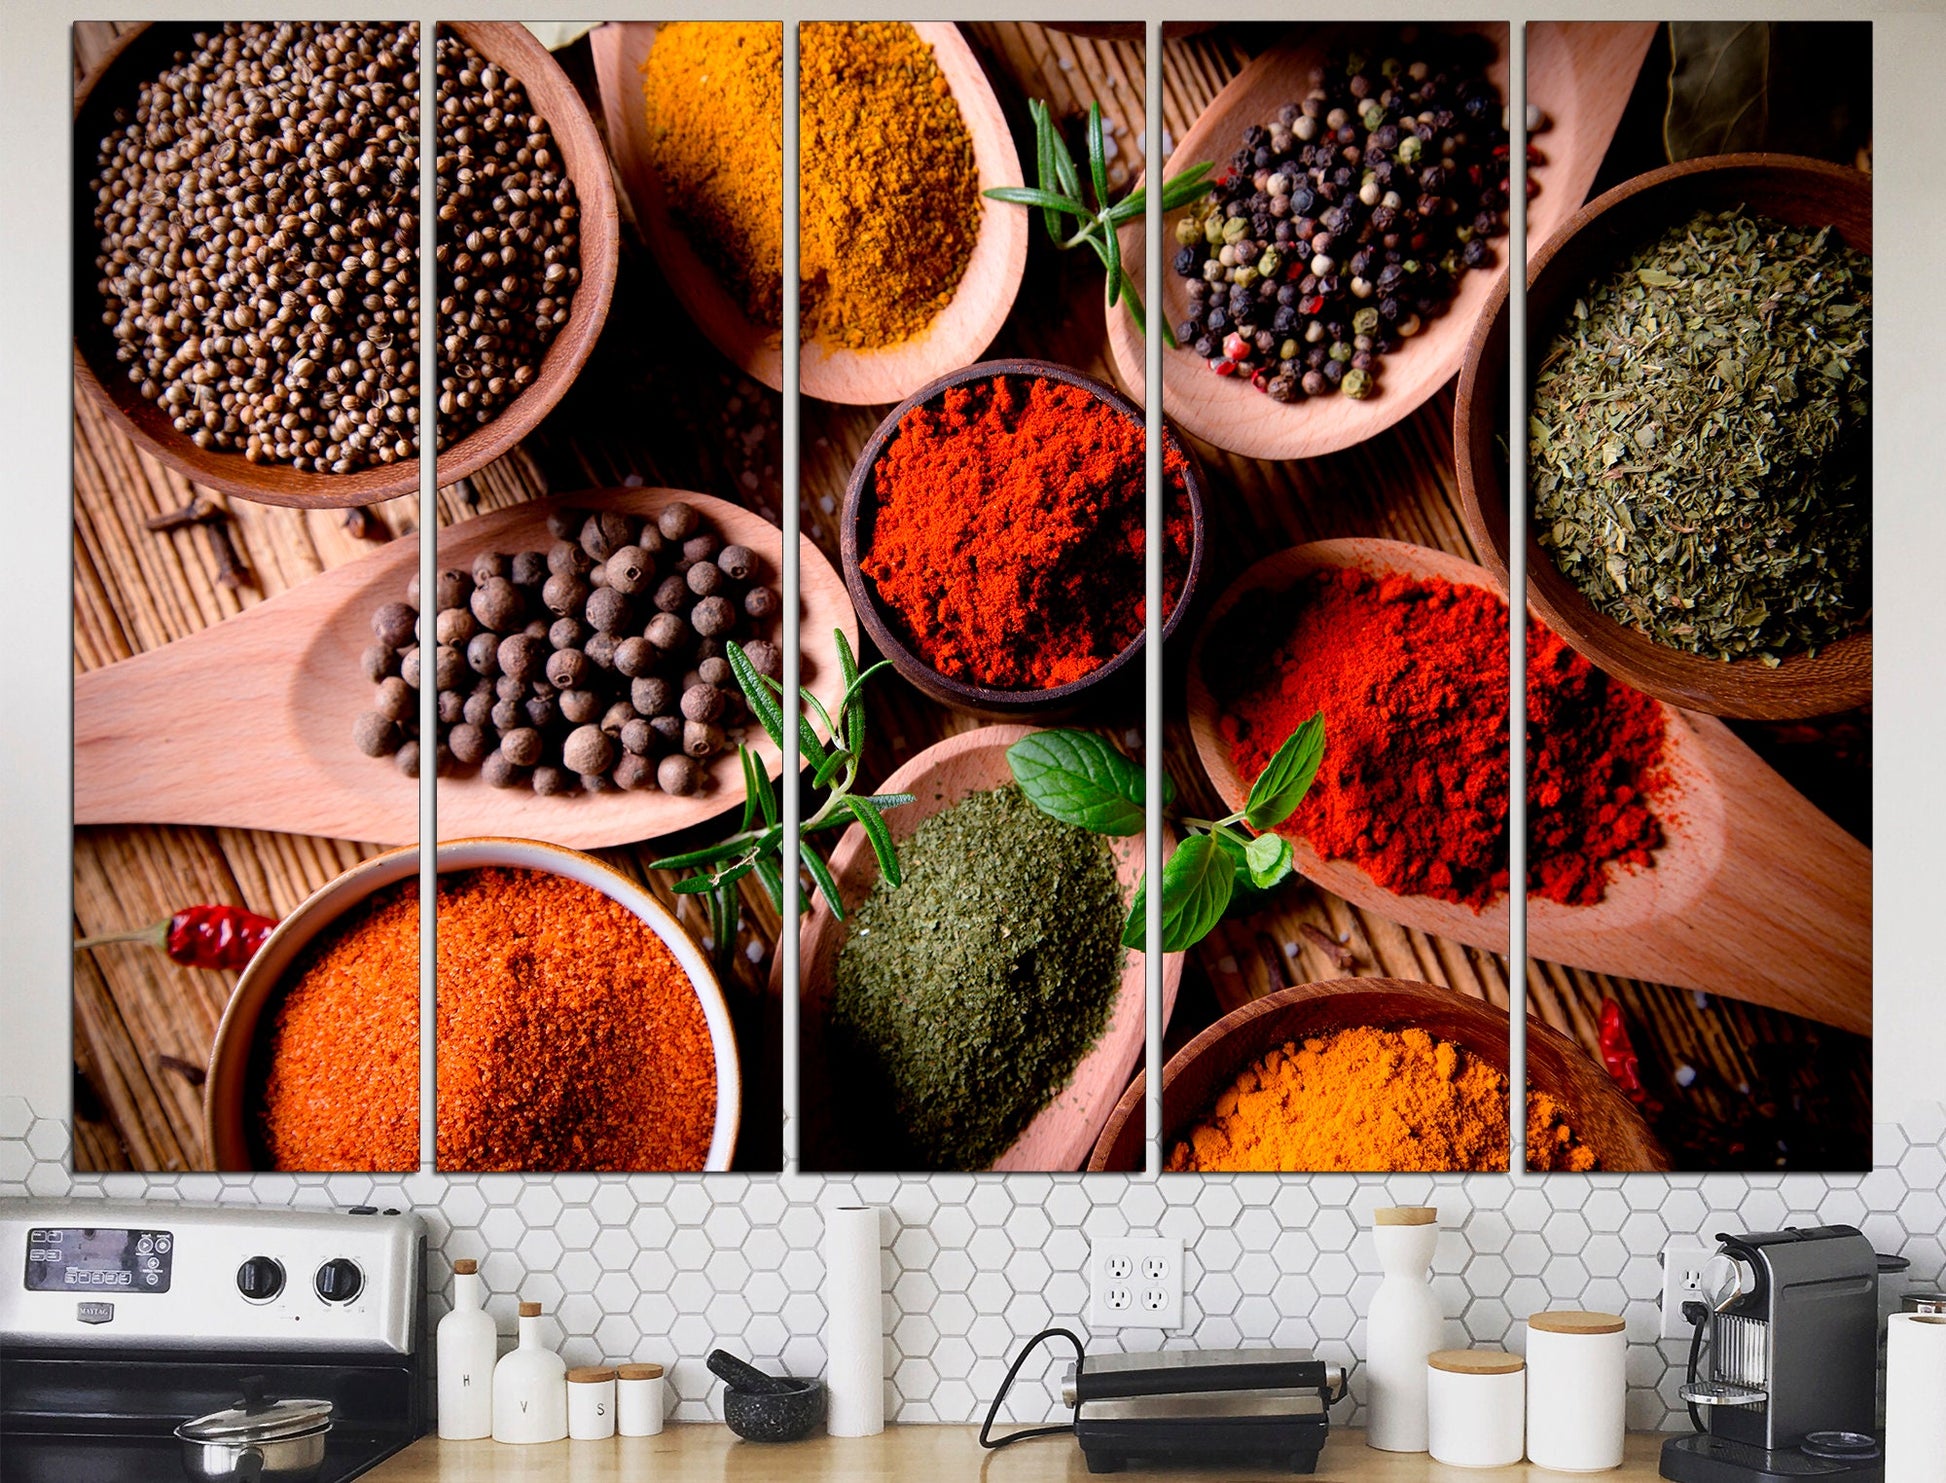 Kitchen Poster Kitchen Herbs Spices Spices Wall Prints, Spices Canvas Kitchen Wall Decor Restaurant Wall Art